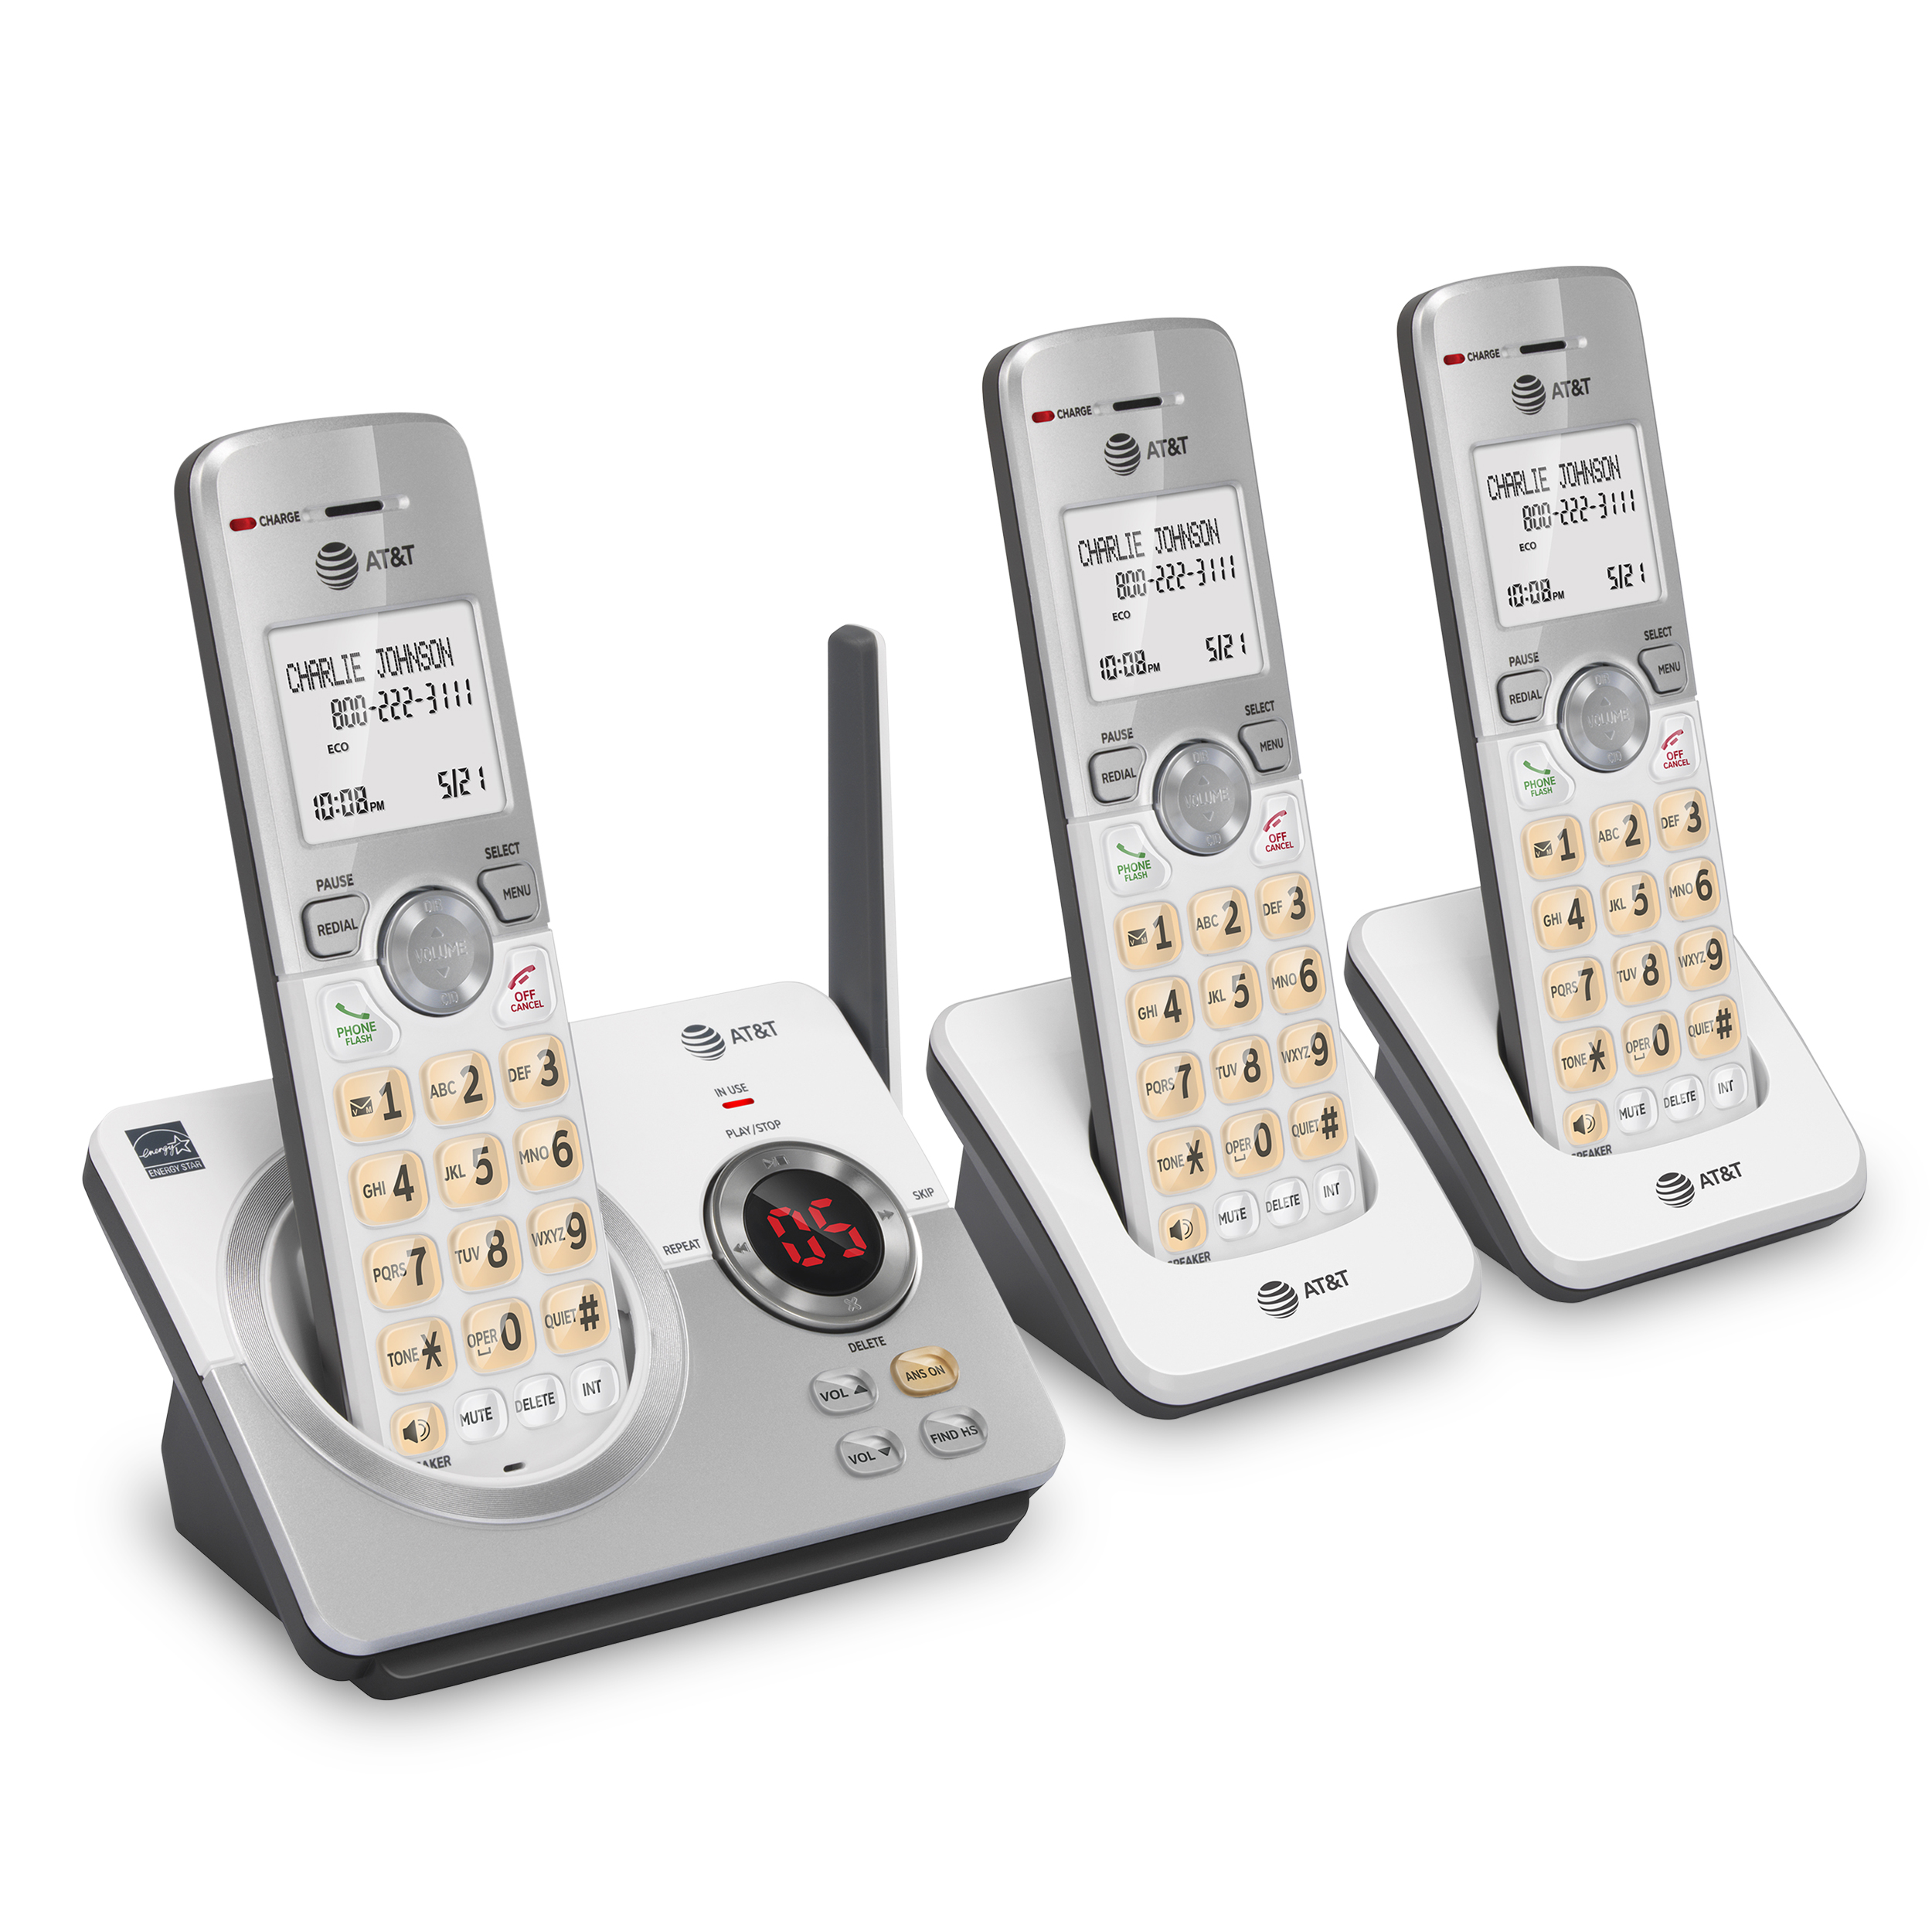 AT&T EL52319 Expandable Cordless Phone with Unsurpassed Range, Answering System and Caller ID, 3 Handsets, White/Silver - image 4 of 10